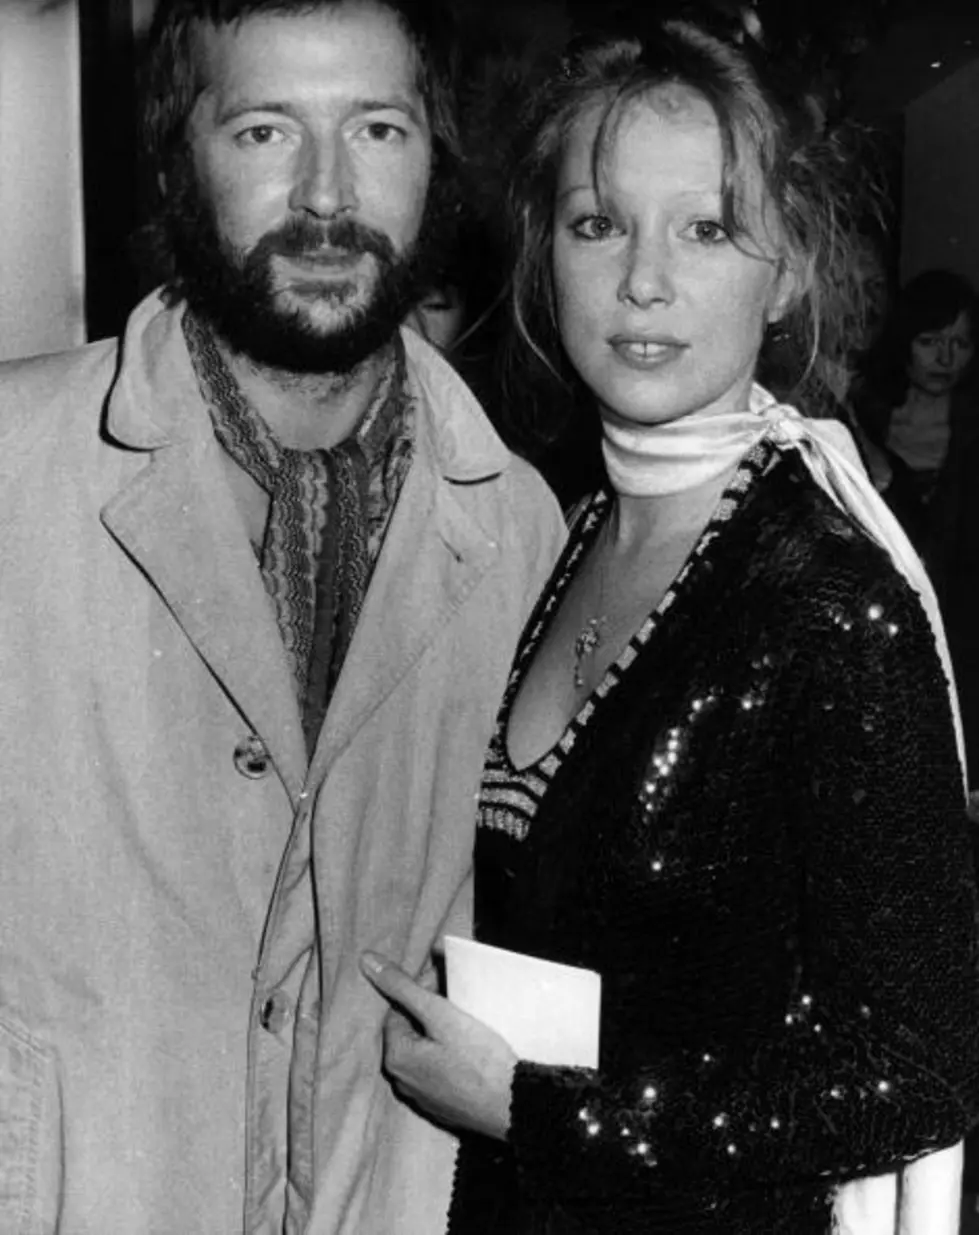 Clapton And Layla; Happy Birthday to Both!